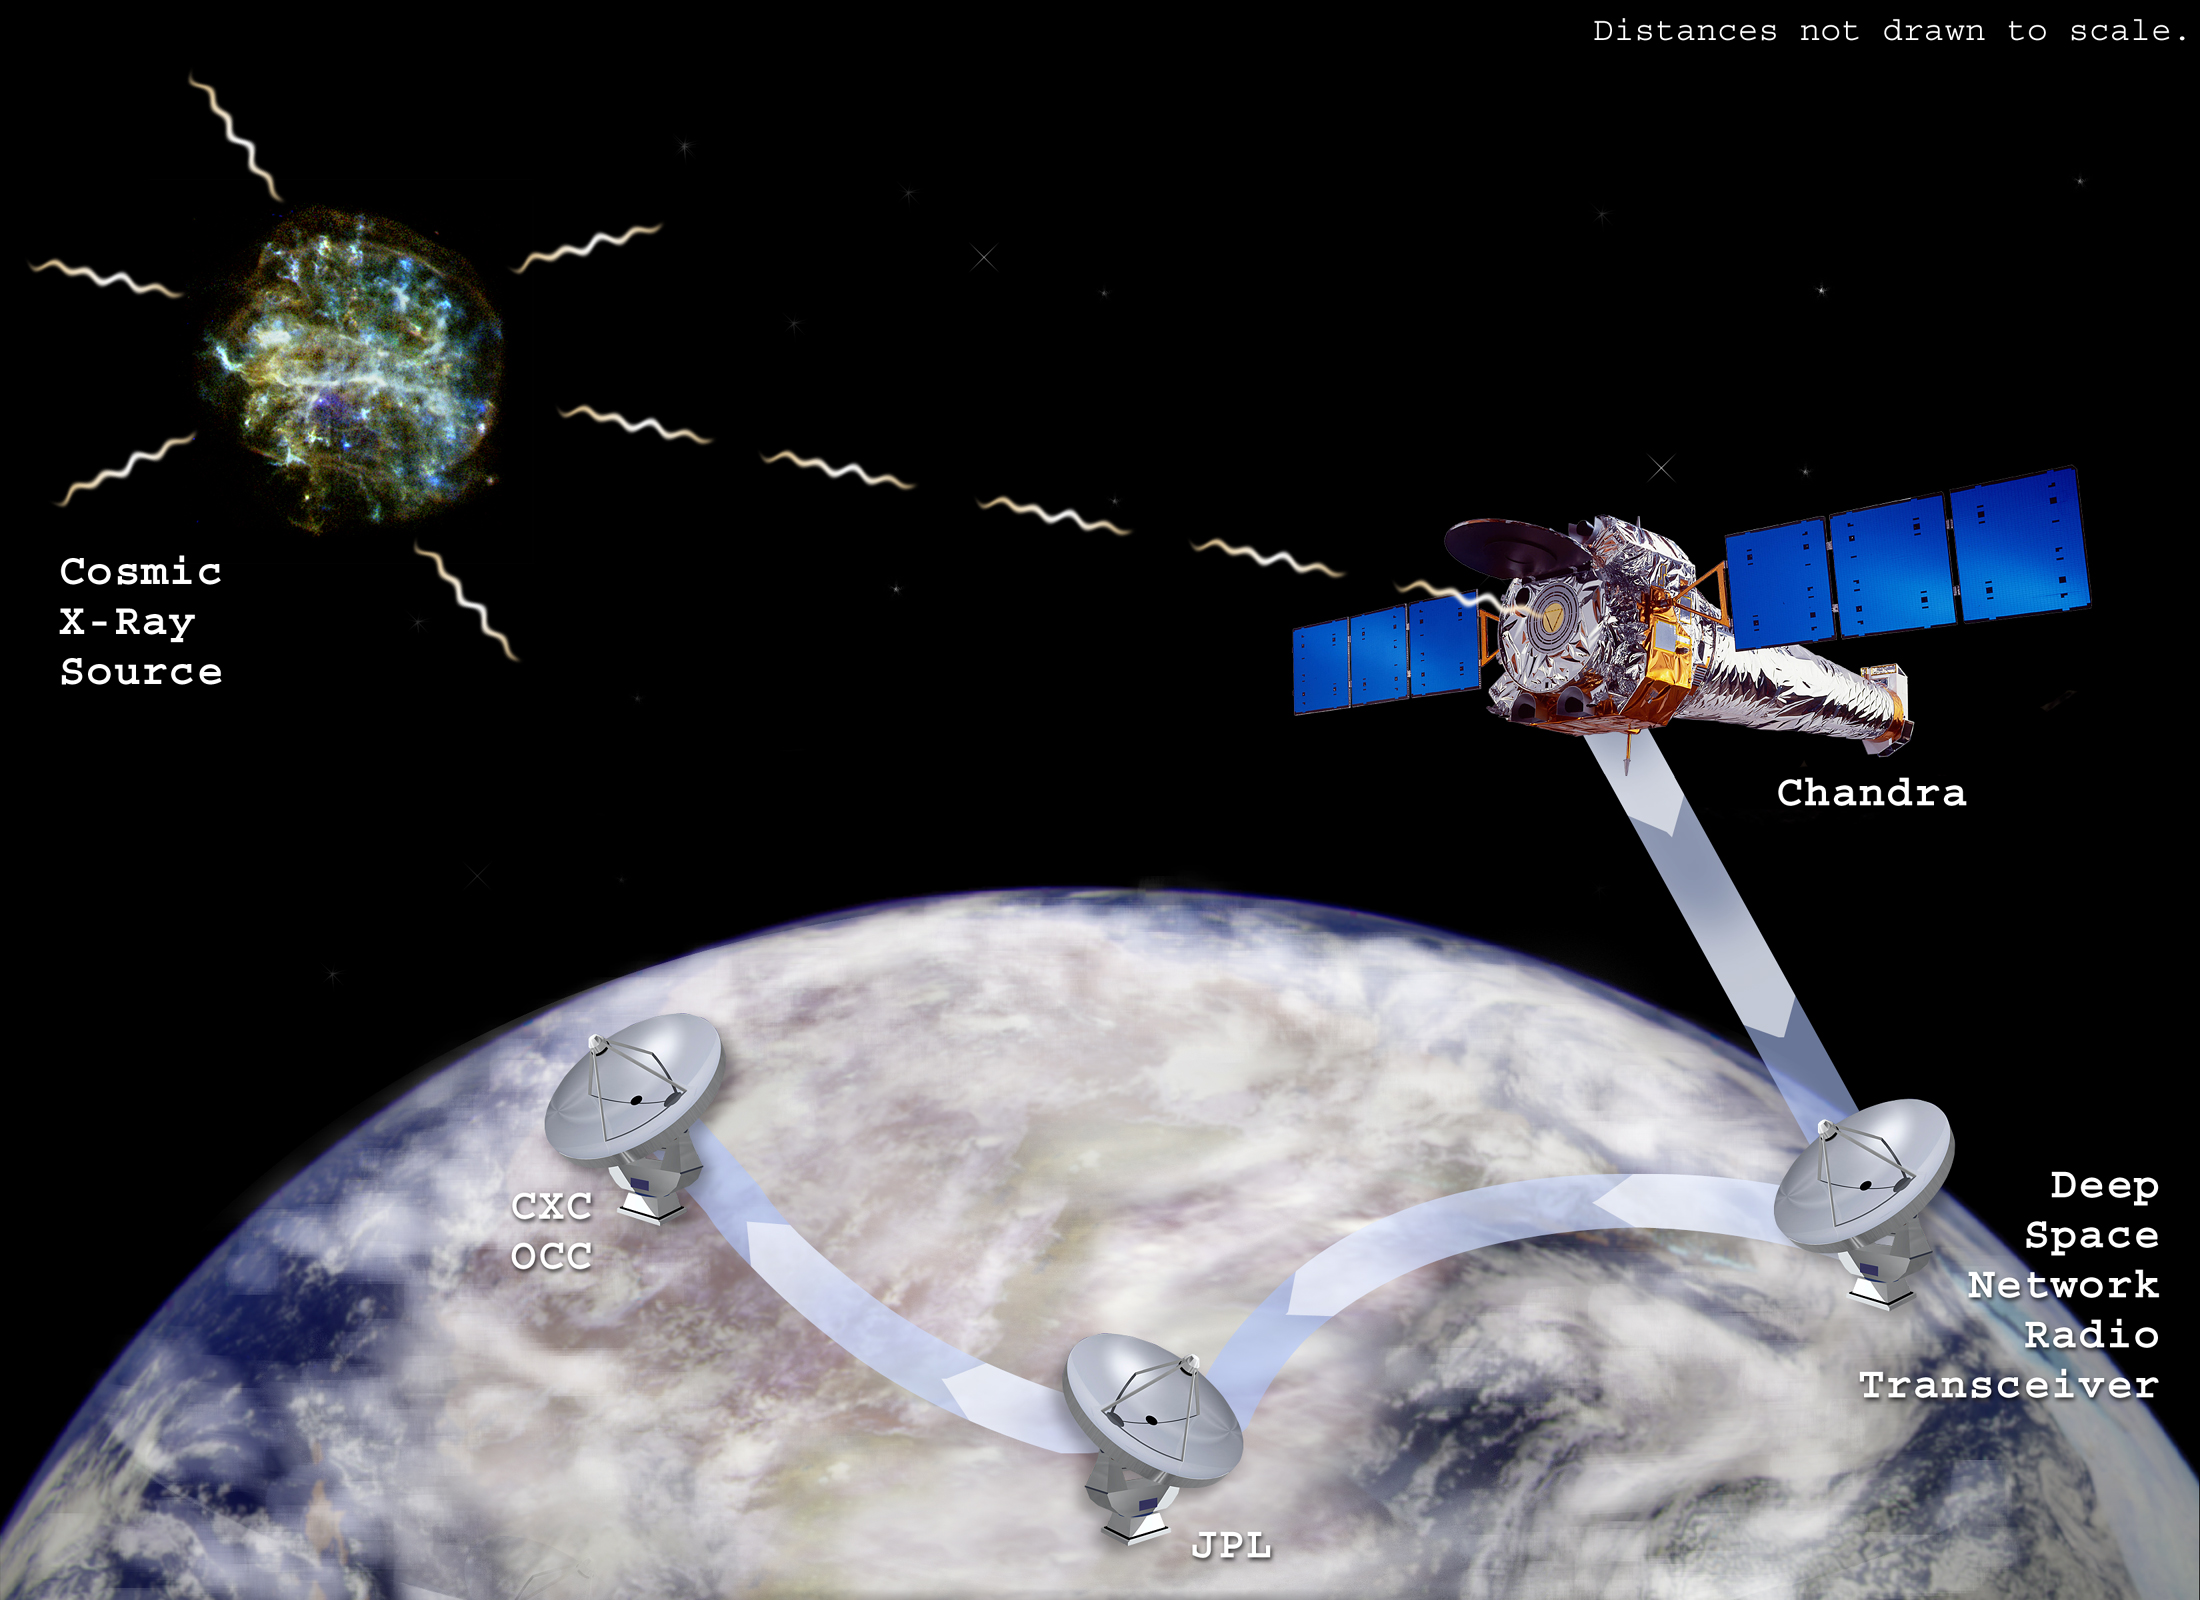 Chandra and the Deep Space Network (DSN), Illustration NASA/CXC/M. Weiss, NASA 